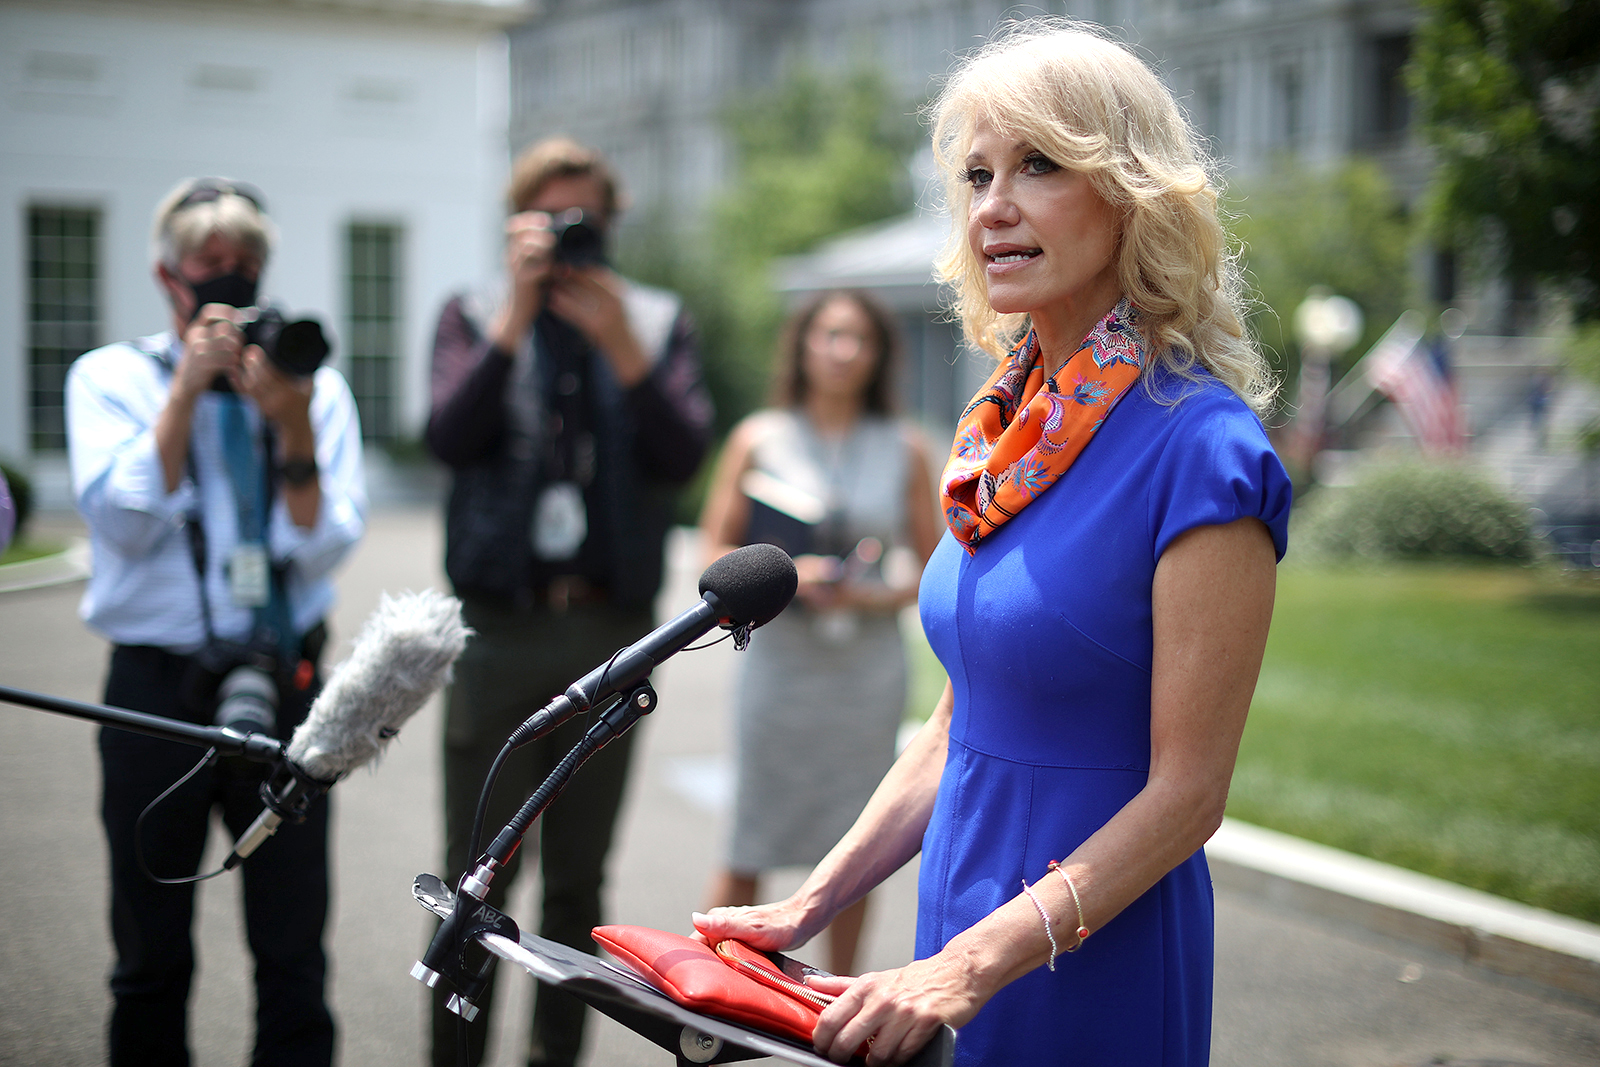 Kellyanne Conway, counselor to President Donald Trump, talks to reporters outside the White House West Wing in Washington, DC on July 07.